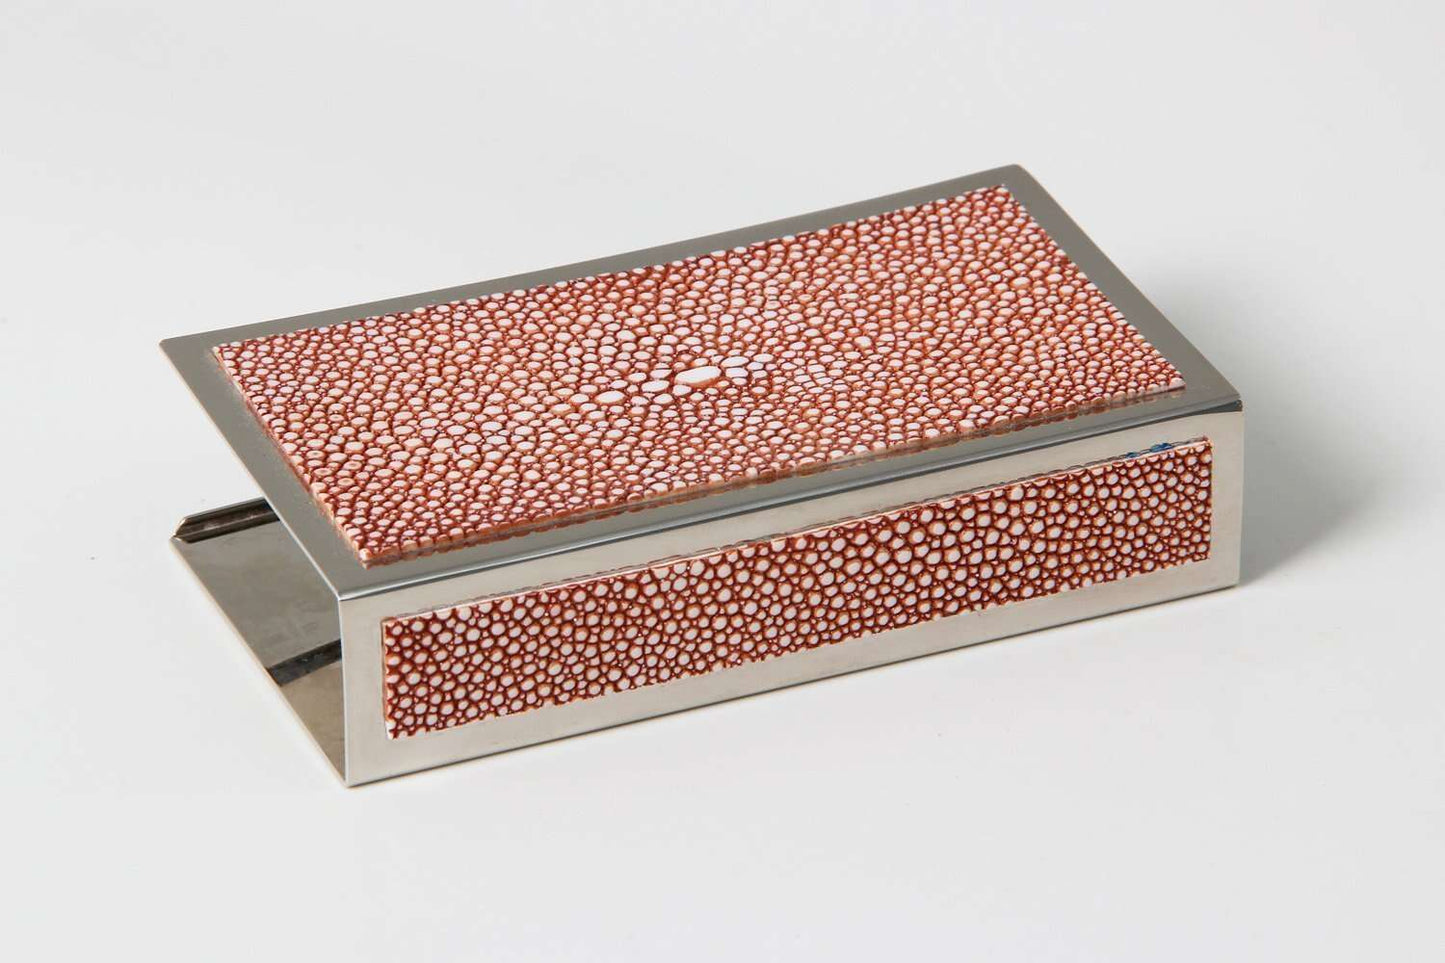 Matchbox Holders in Coral Shagreen